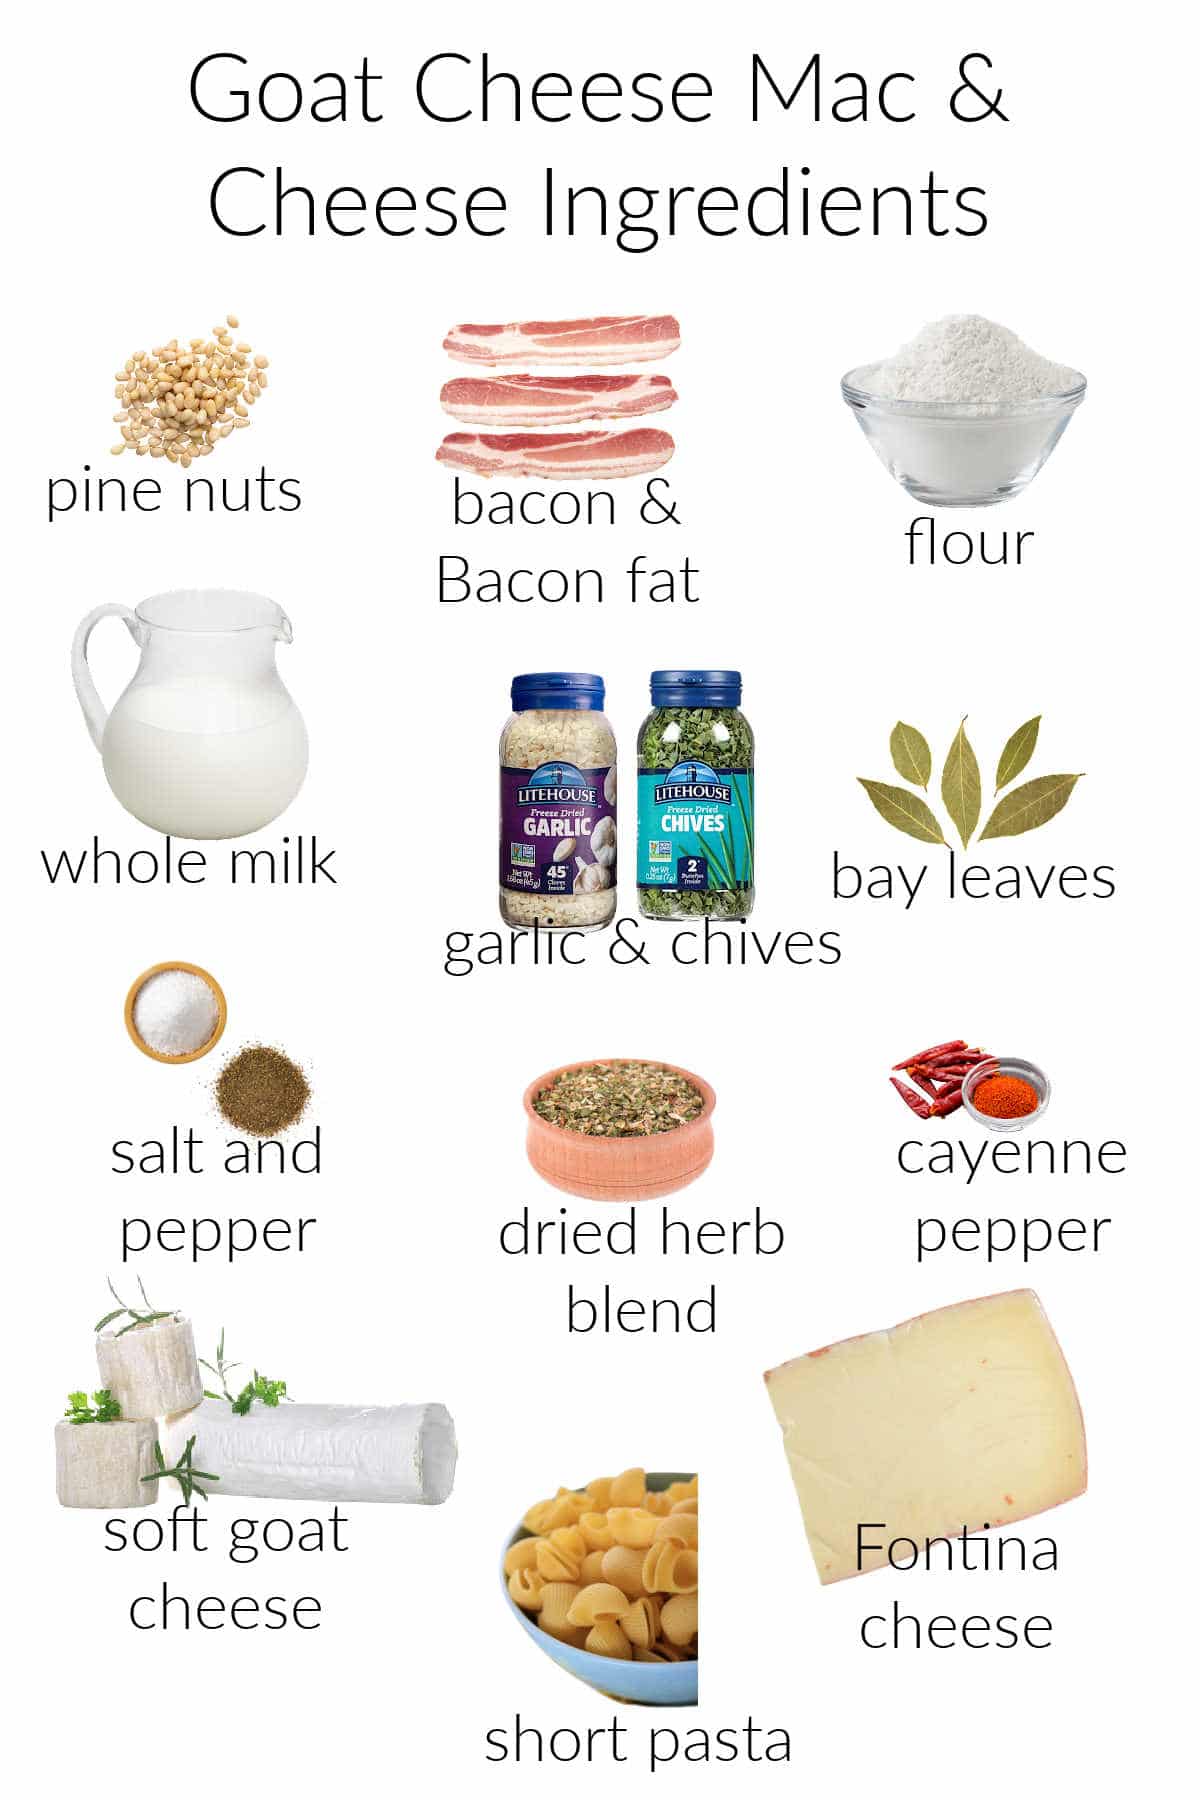 A collage of the ingredients needed to make goat cheese mac and cheese with fontina, bacon, and pine nuts.